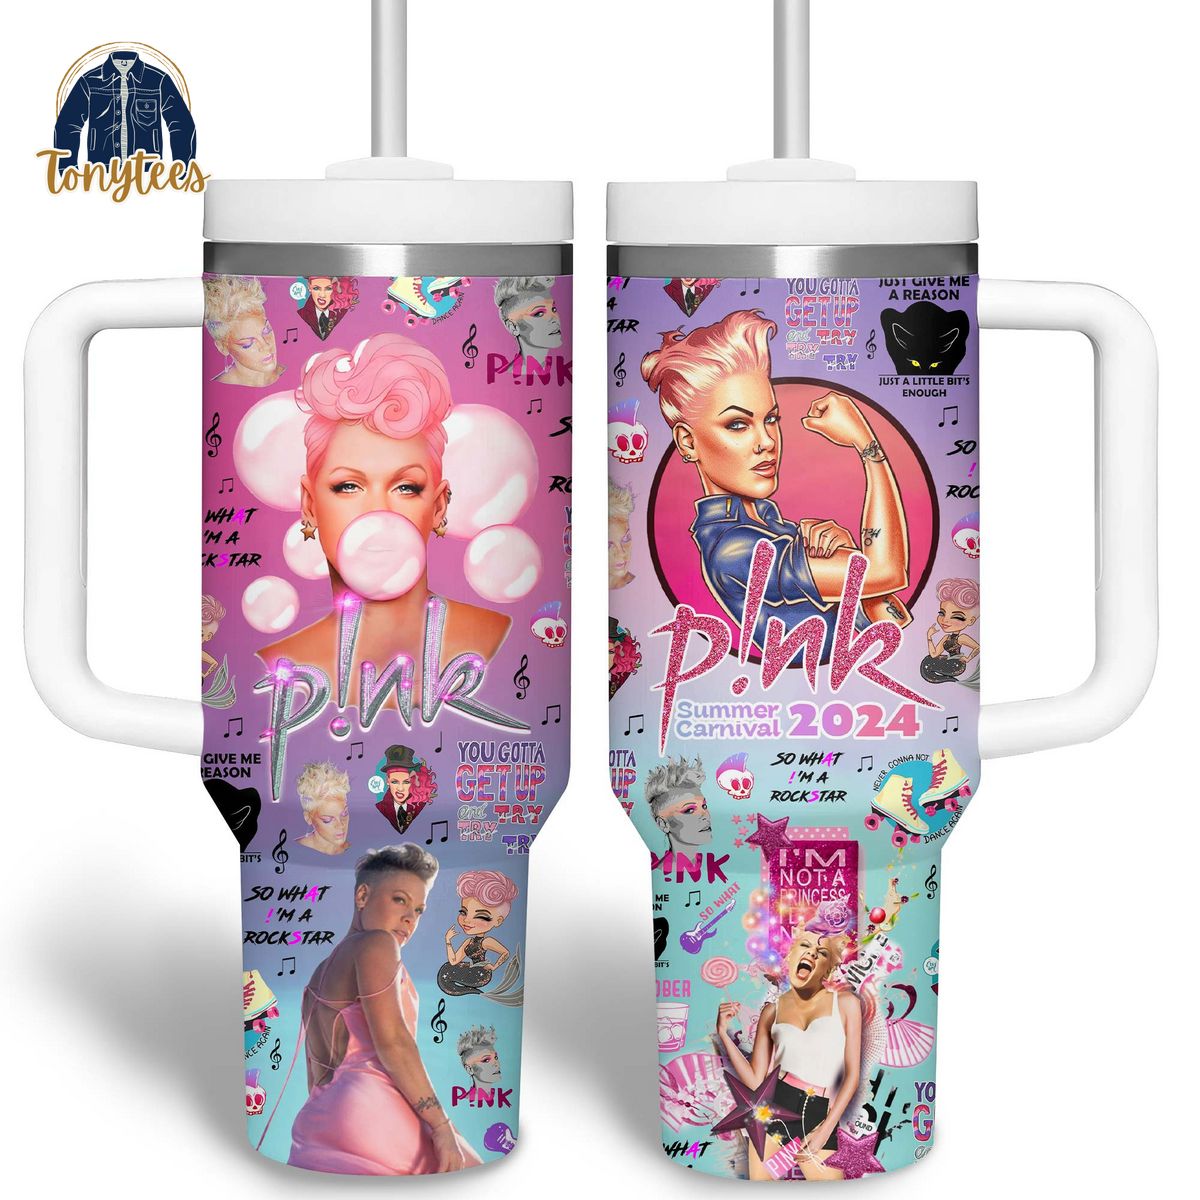 P!nk summer carnival 2024 stanley tumbler cup